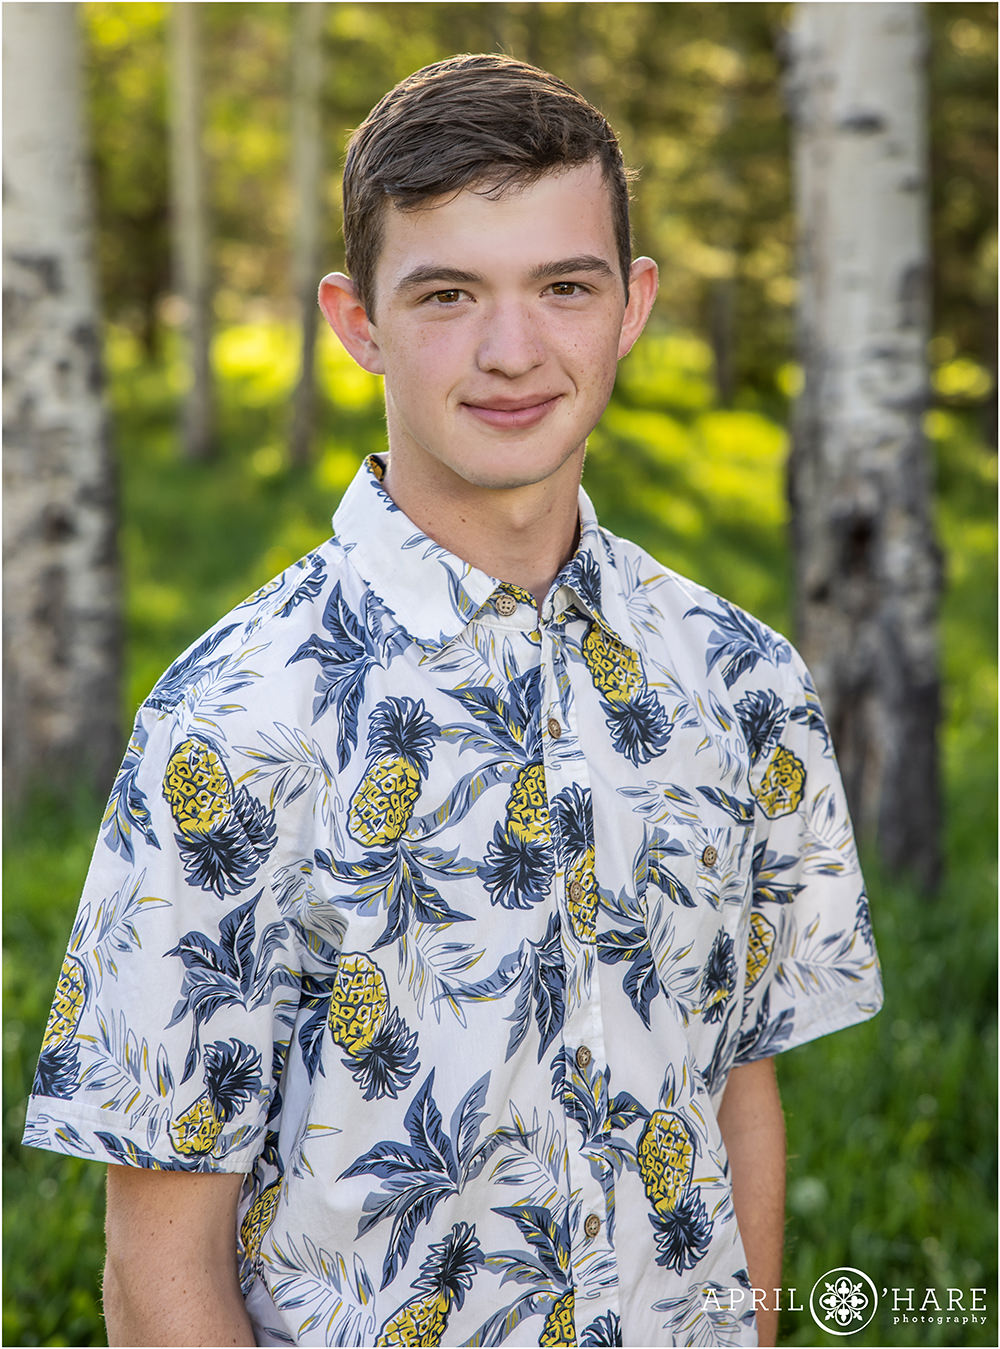 Senior portrait of a young man wearing a pineapple shirt in an aspen tree grove in Colorado